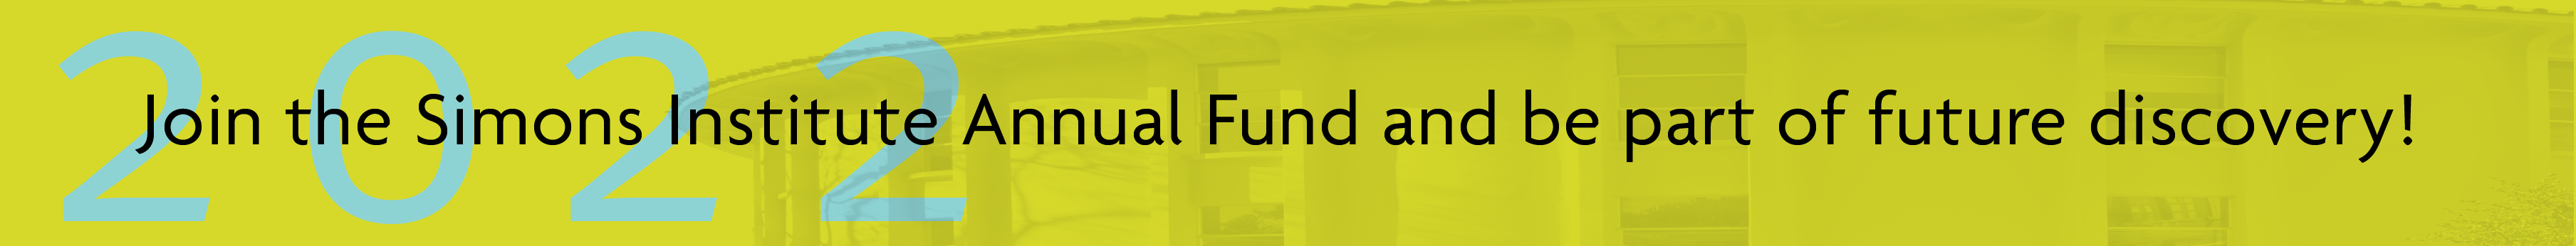 Join the Simons Institute Annual Fund and be a part of future discovery!